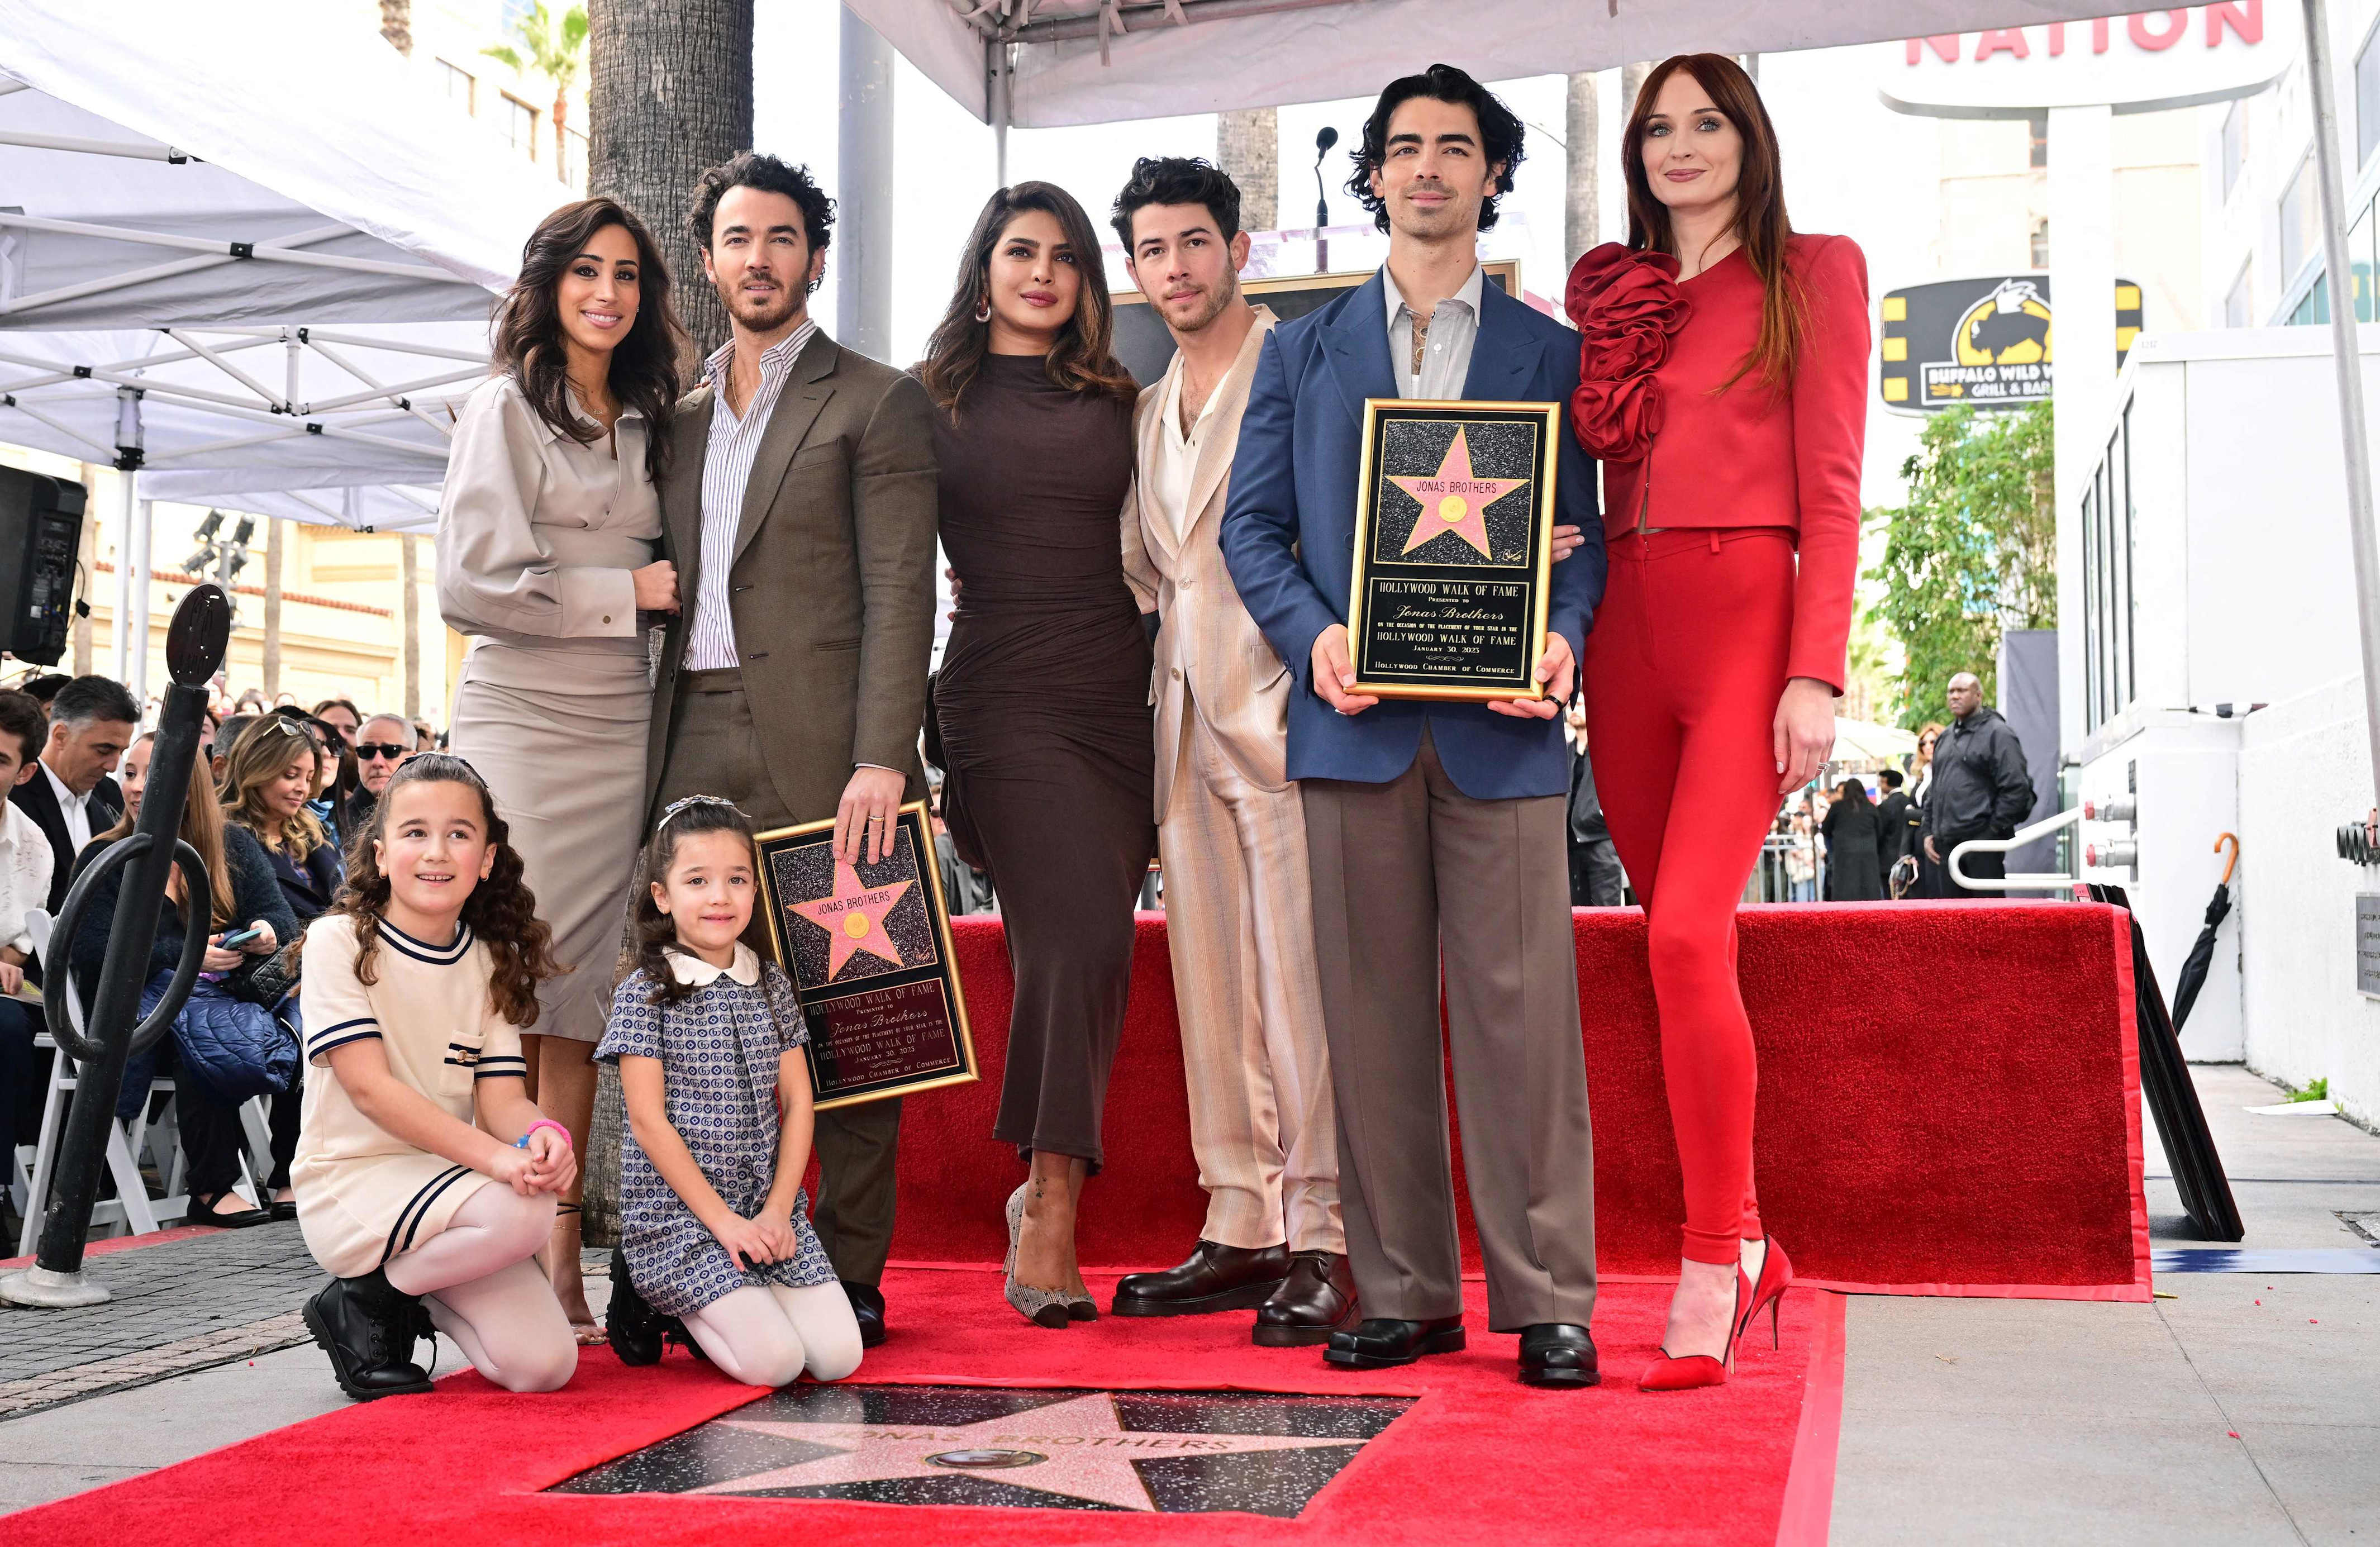 The Jonas Brothers, Kevin Jonas (second from left), Nick Jonas (center) and Joe Jonas (second from right), pose with their wives and children beside their Hollywood Walk of Fame Star after it was unveiled on Jan. 30, 2023 in Hollywood, Calif.